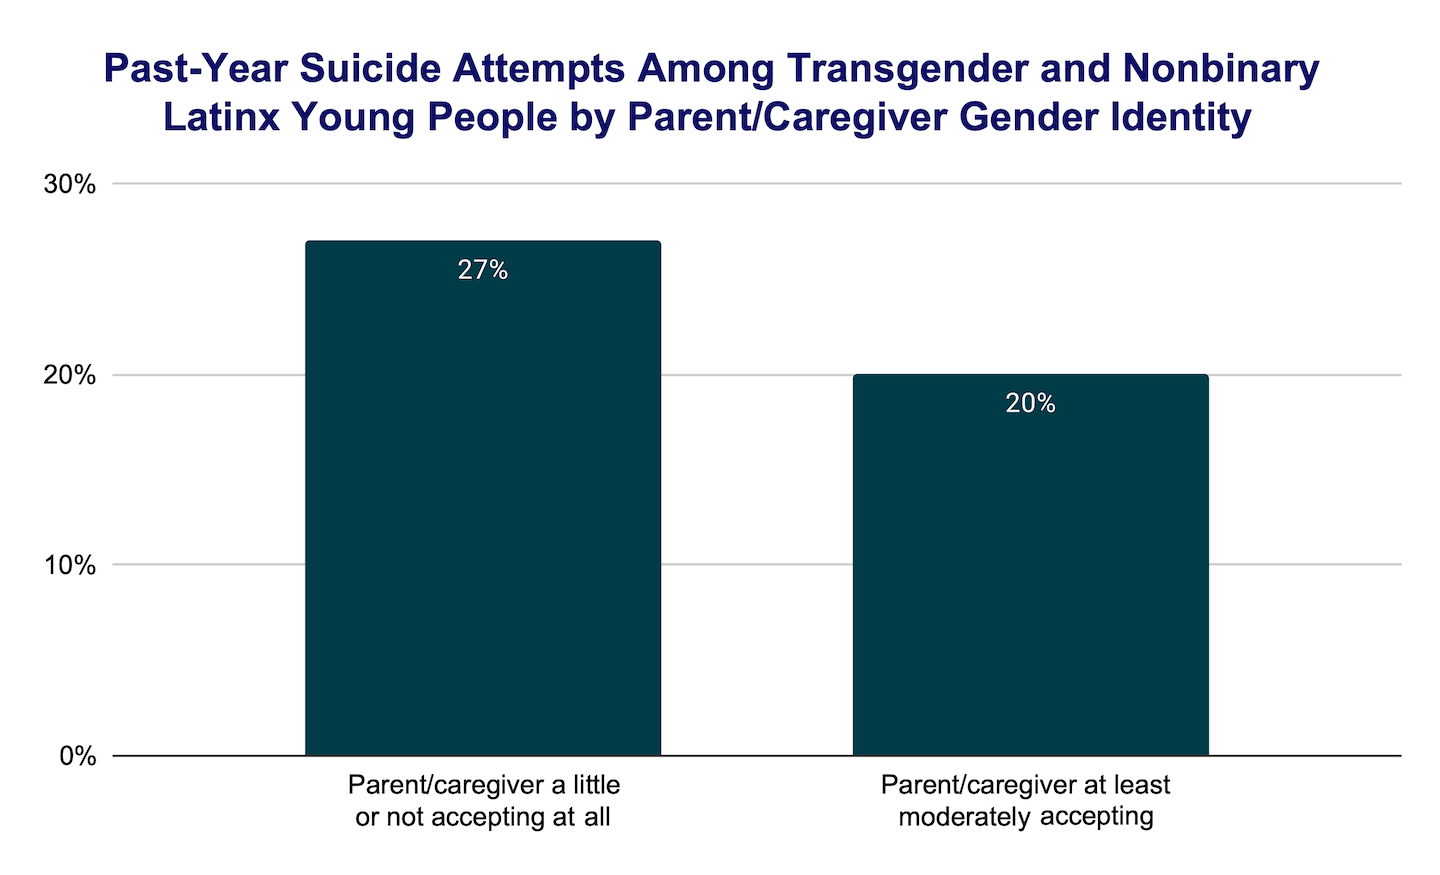 Past-year suicide attempts among transgender and nonbinary Latinx young people by parent/caregiver gender identity bar graph